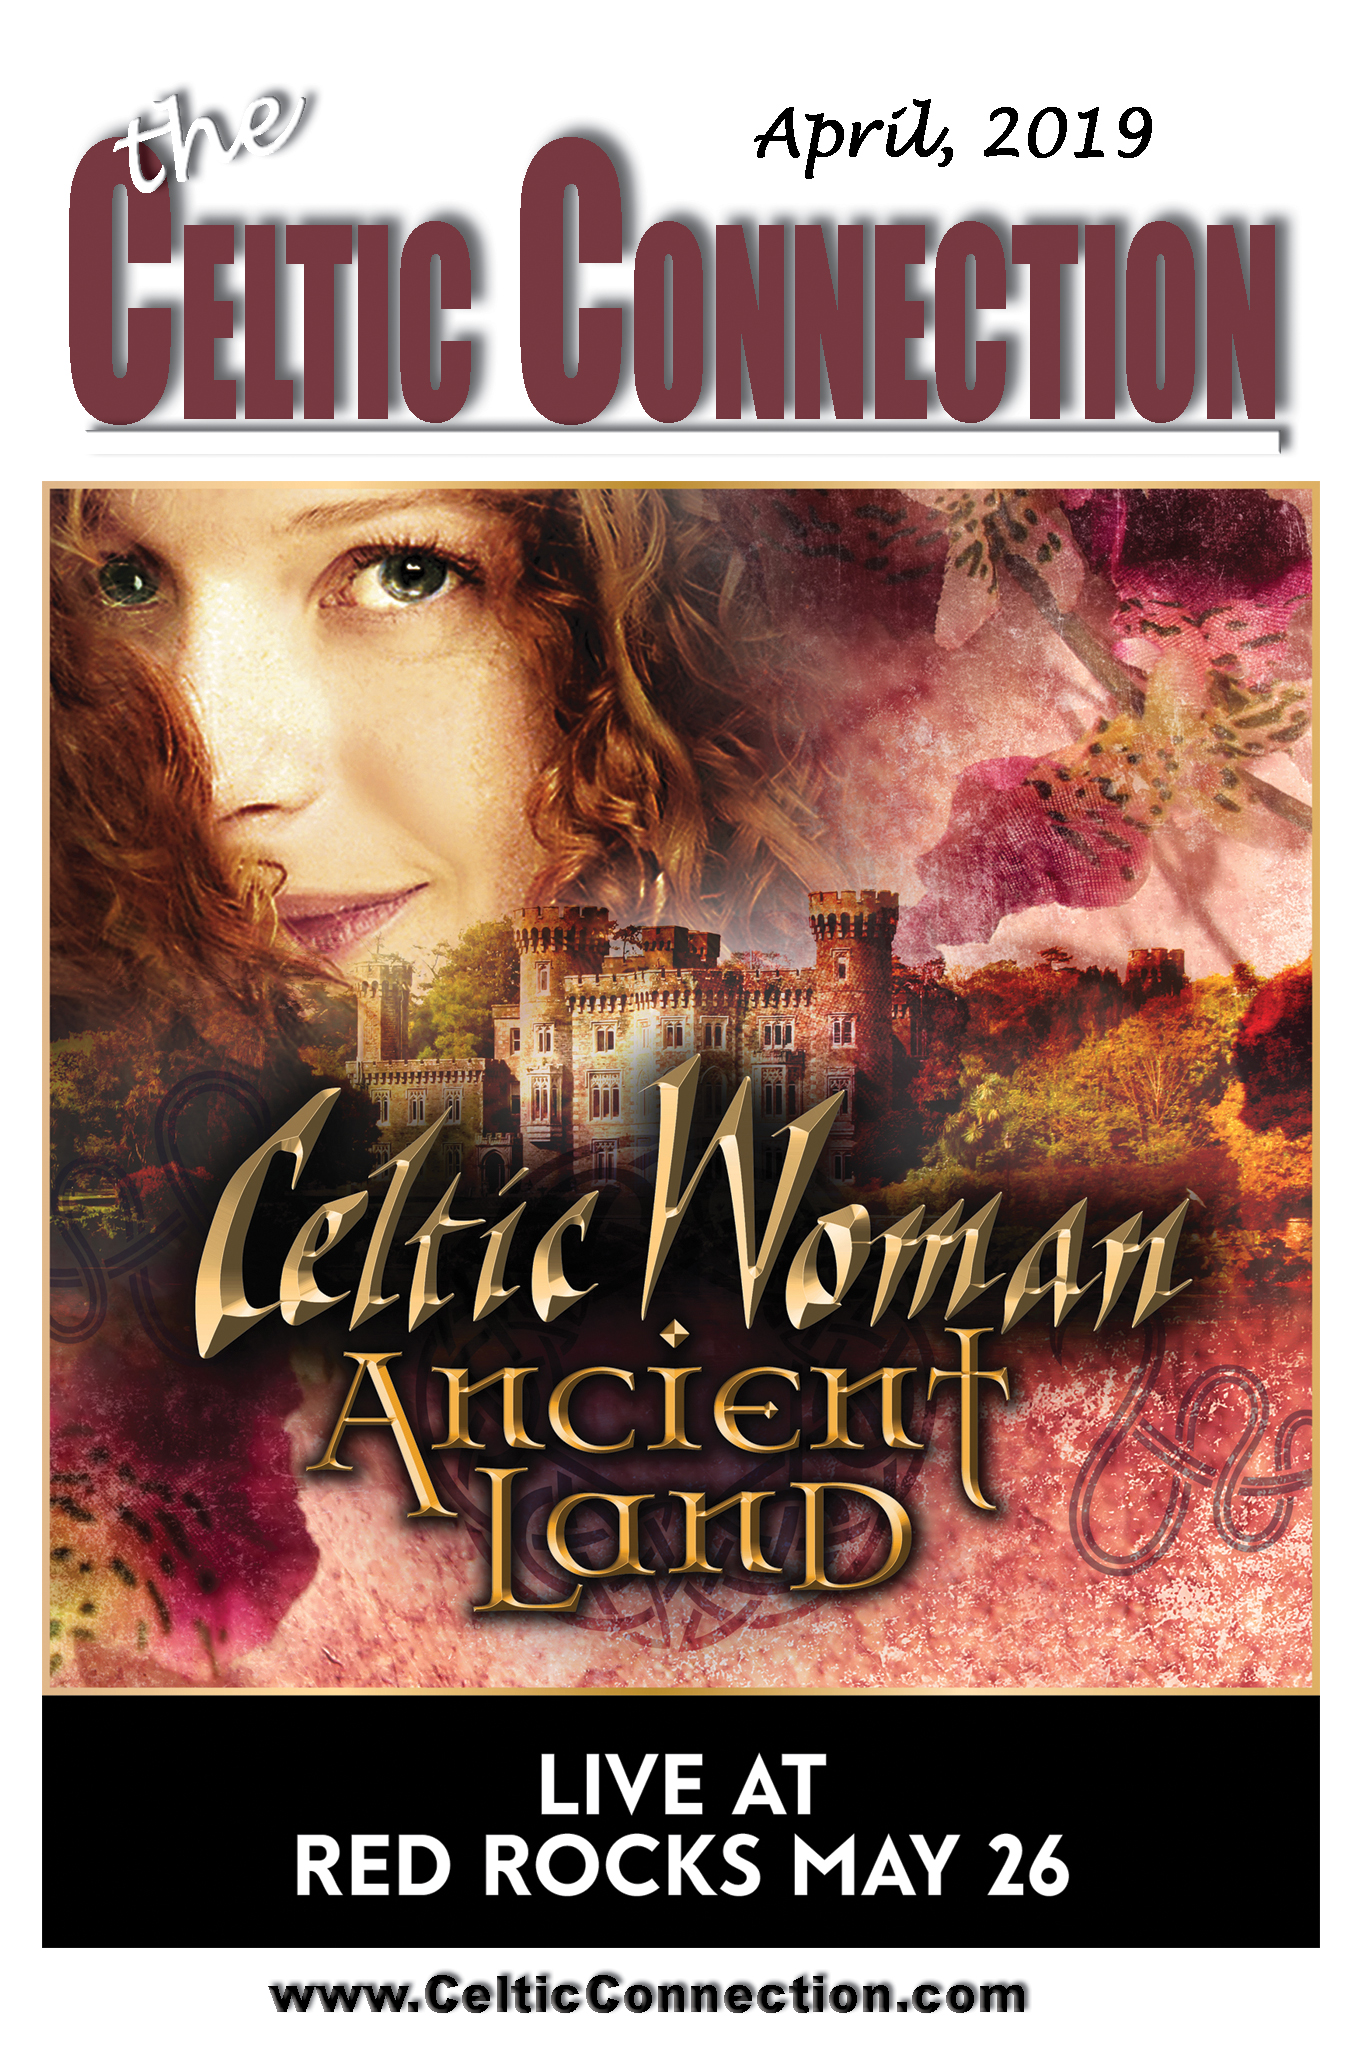 Celtic Woman at Red Rocks